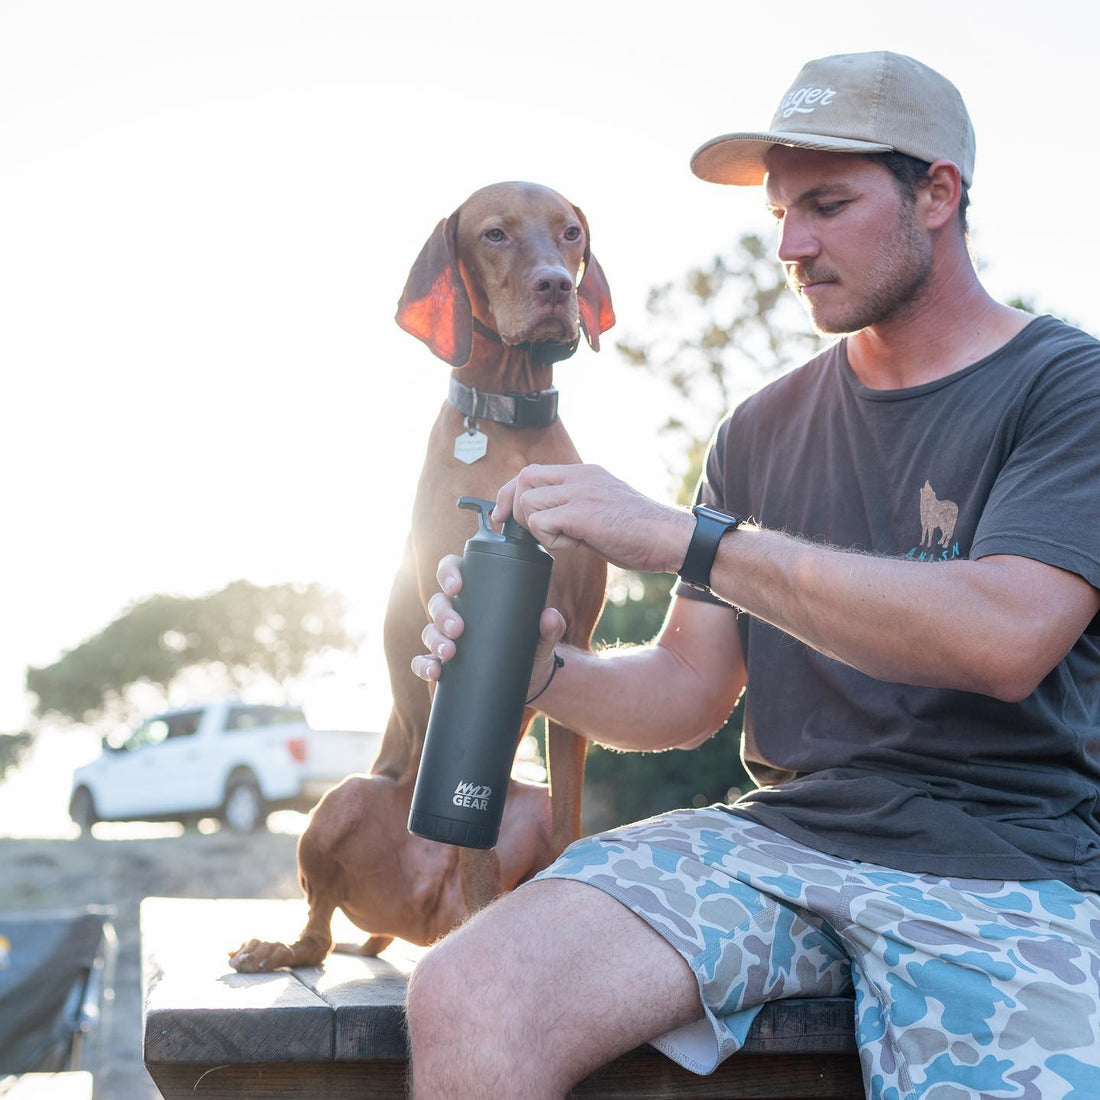 Man sitting with dog opening black Wyld Gear water bottle